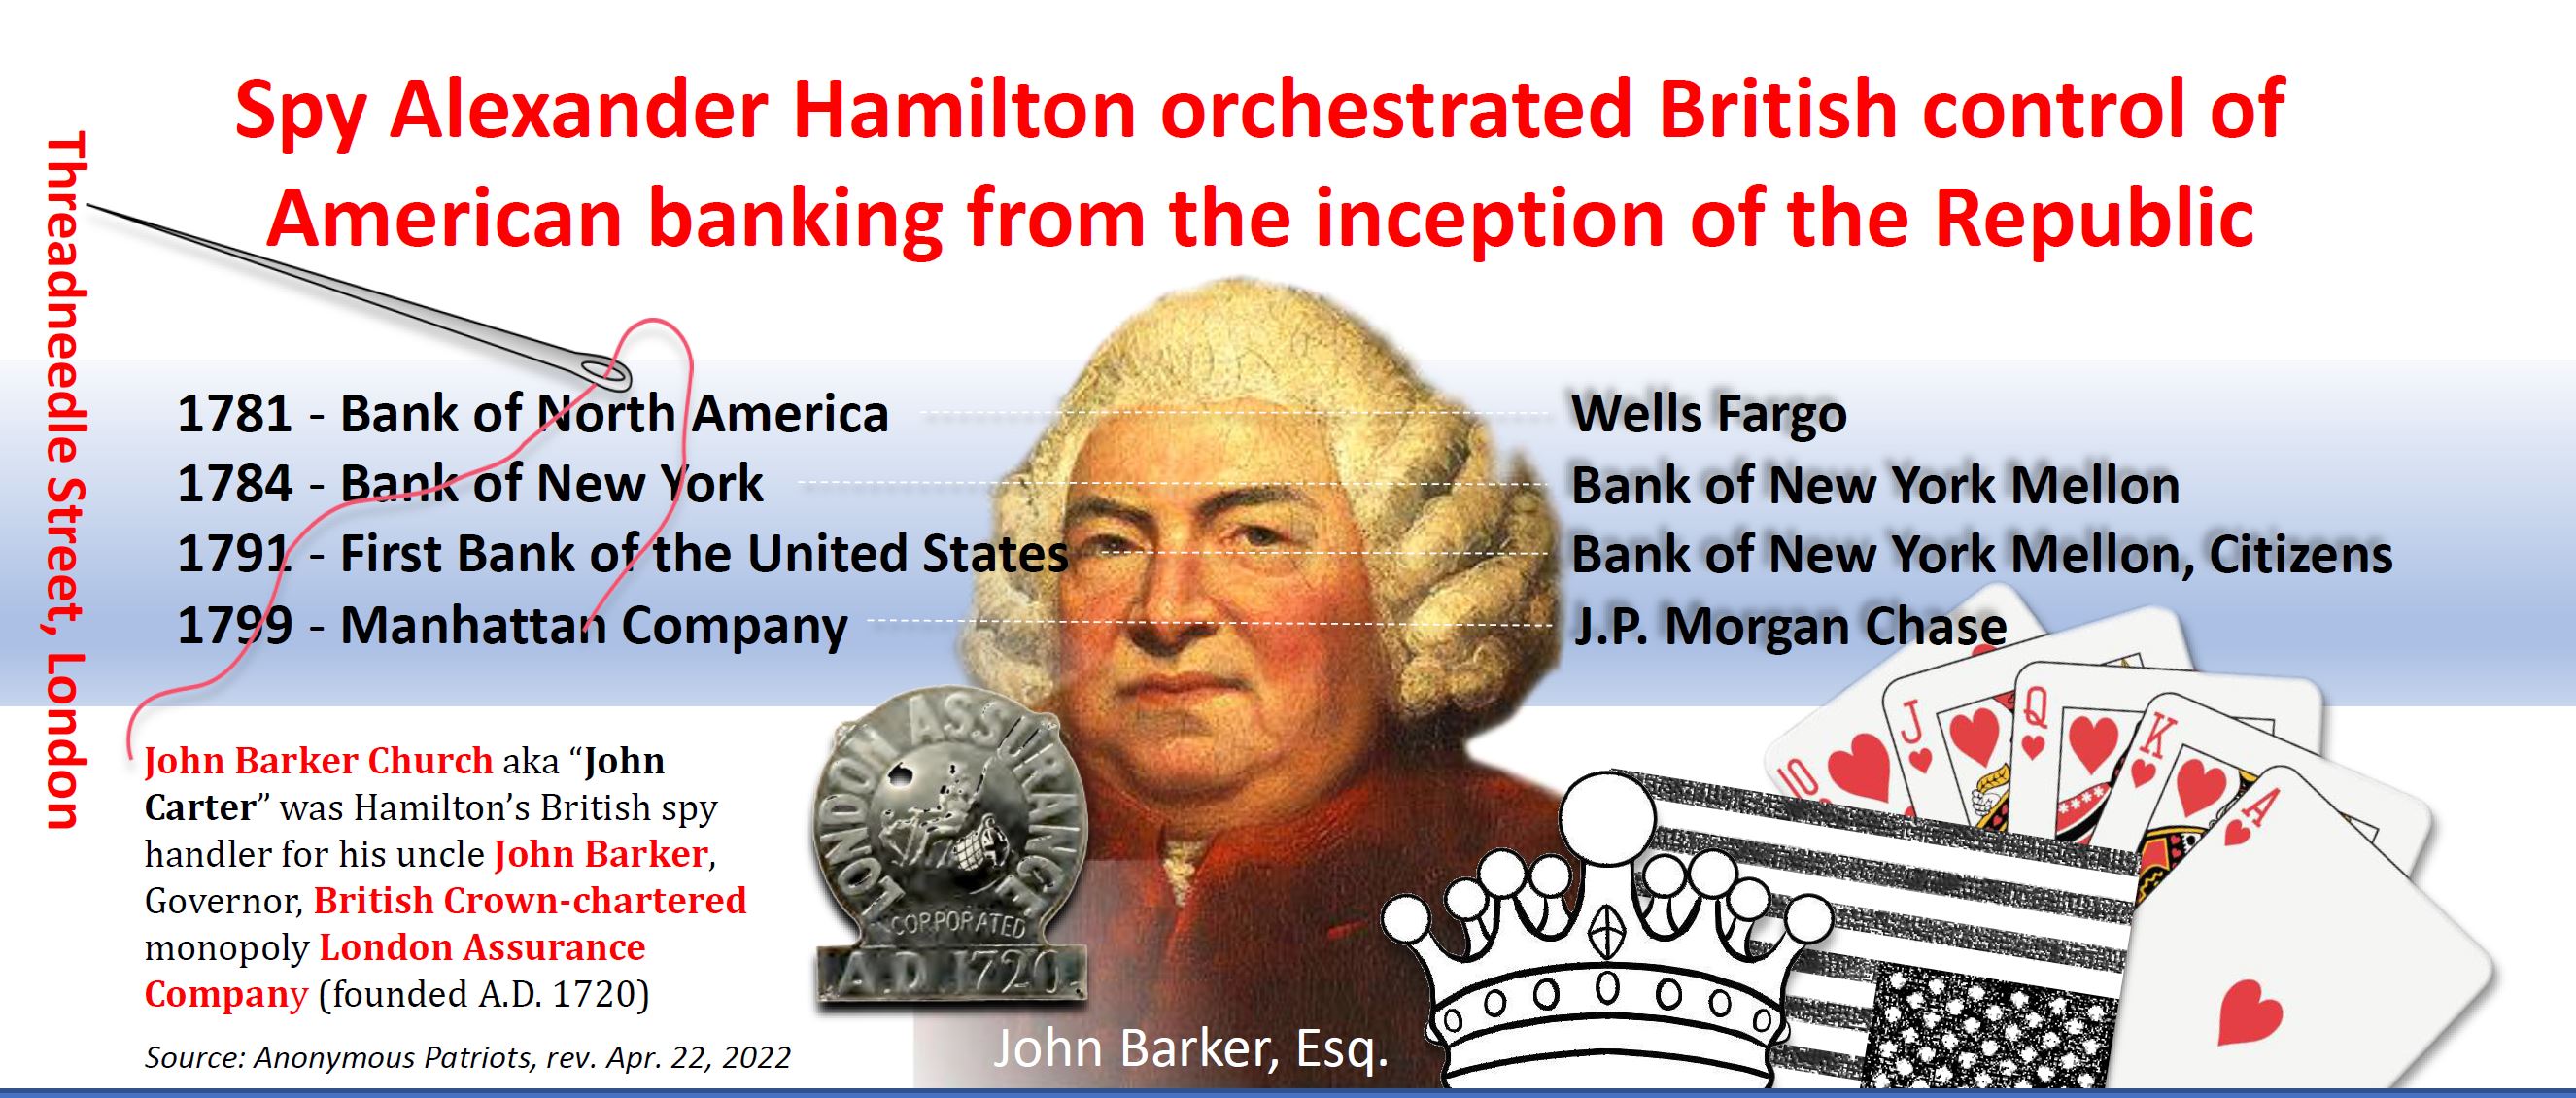 Spy Alexander Hamilton orchestrated British control of American banking from inception of the Republic